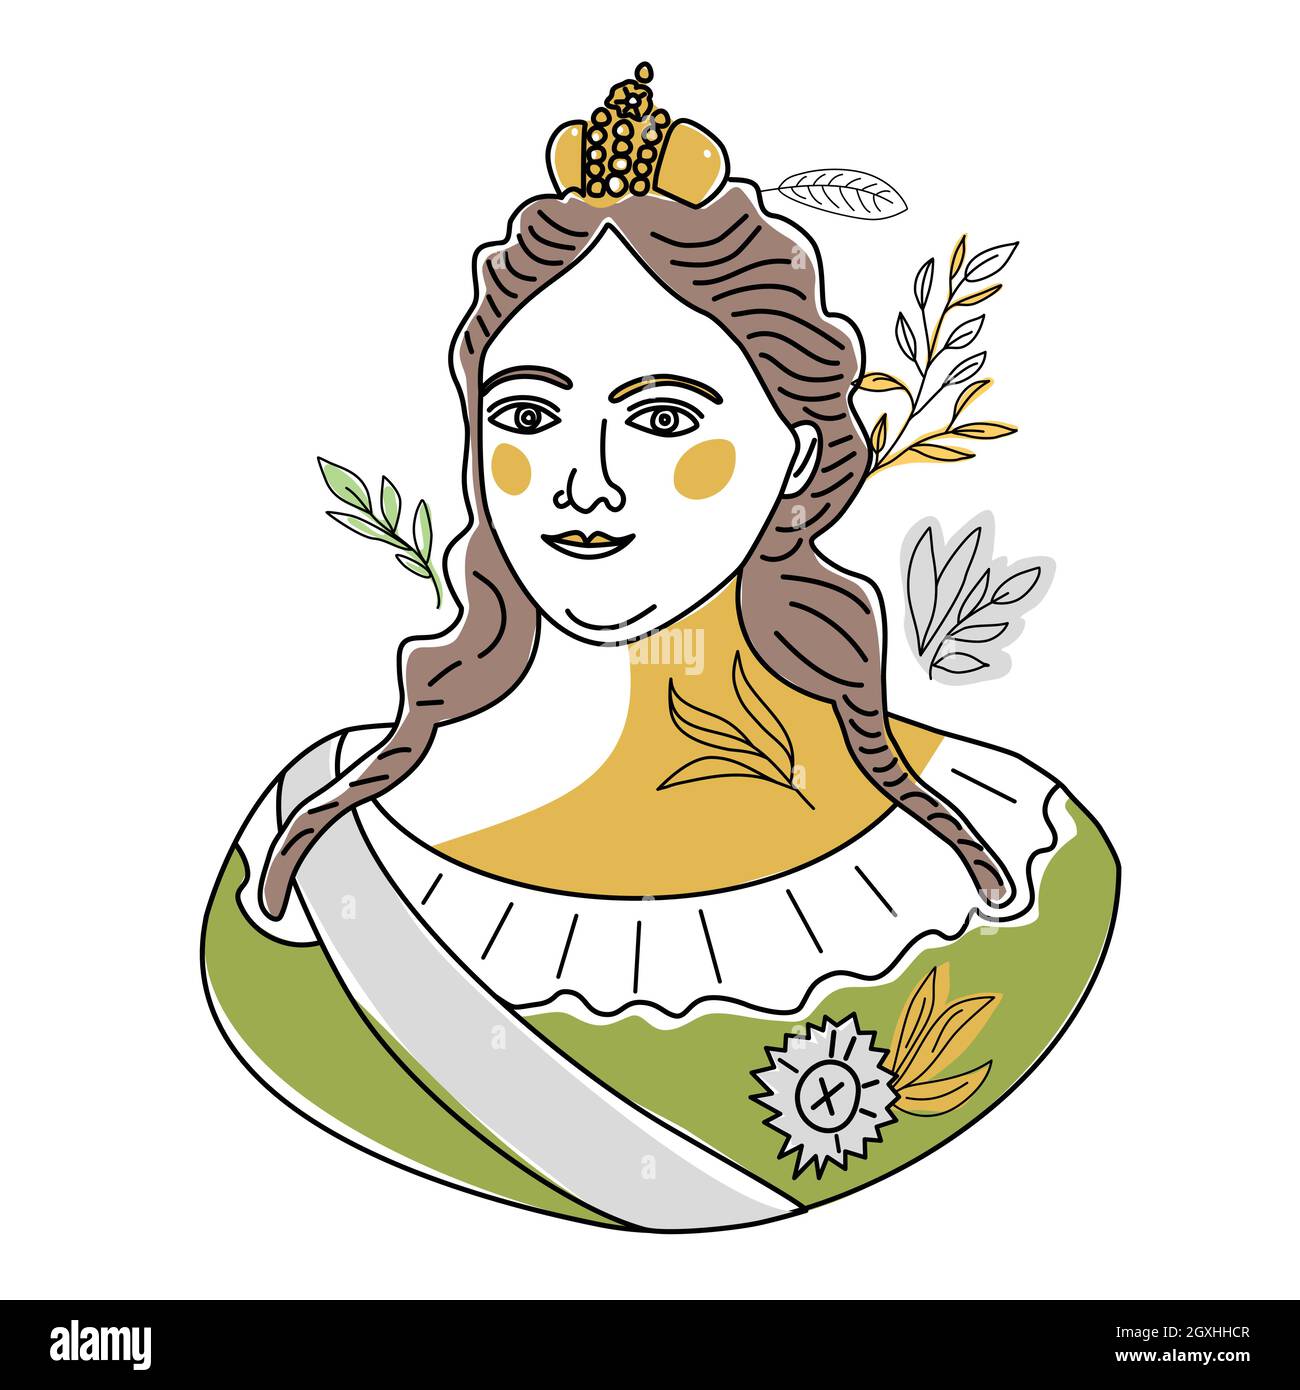 Trend line Illustration of Anna Ioannovna Romanova, niece of Peter the Great and empress of Russian empire. Portrait of historical figure woman in Stock Vector